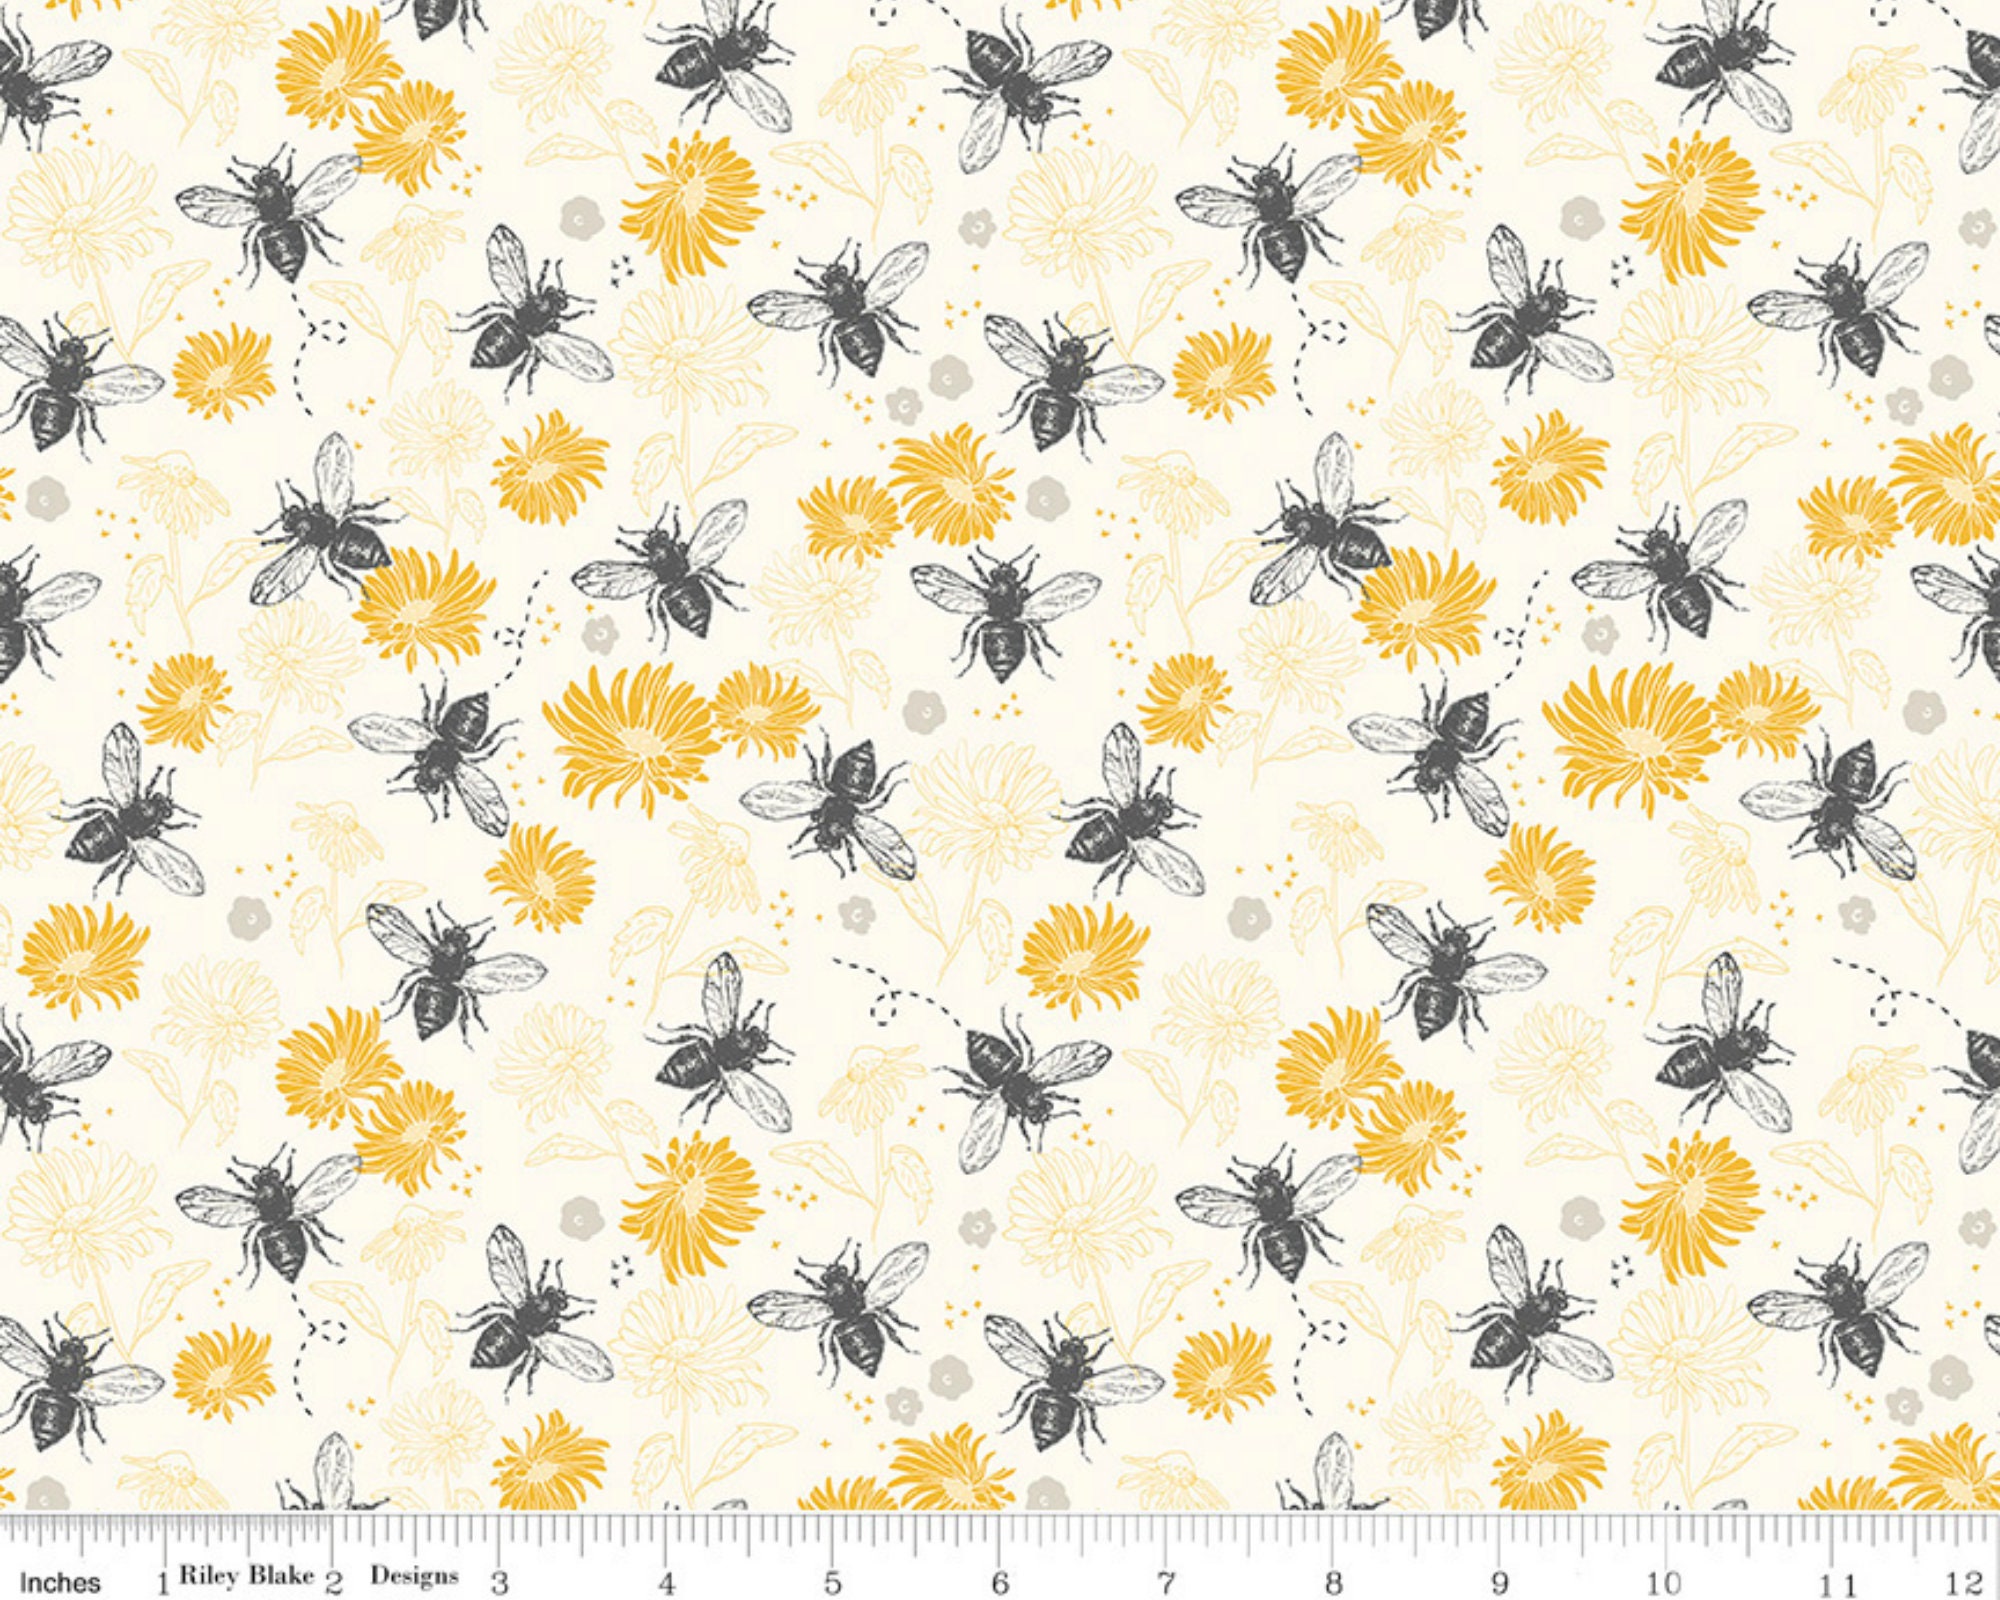 Honey Bee Floral Fabric, Riley Blake Quilting Cotton Fabric, Bee Kind, Busy  as a Bee Fabric, Queen Bee Fabric, Bee Hive Fabric, Bee Fabric